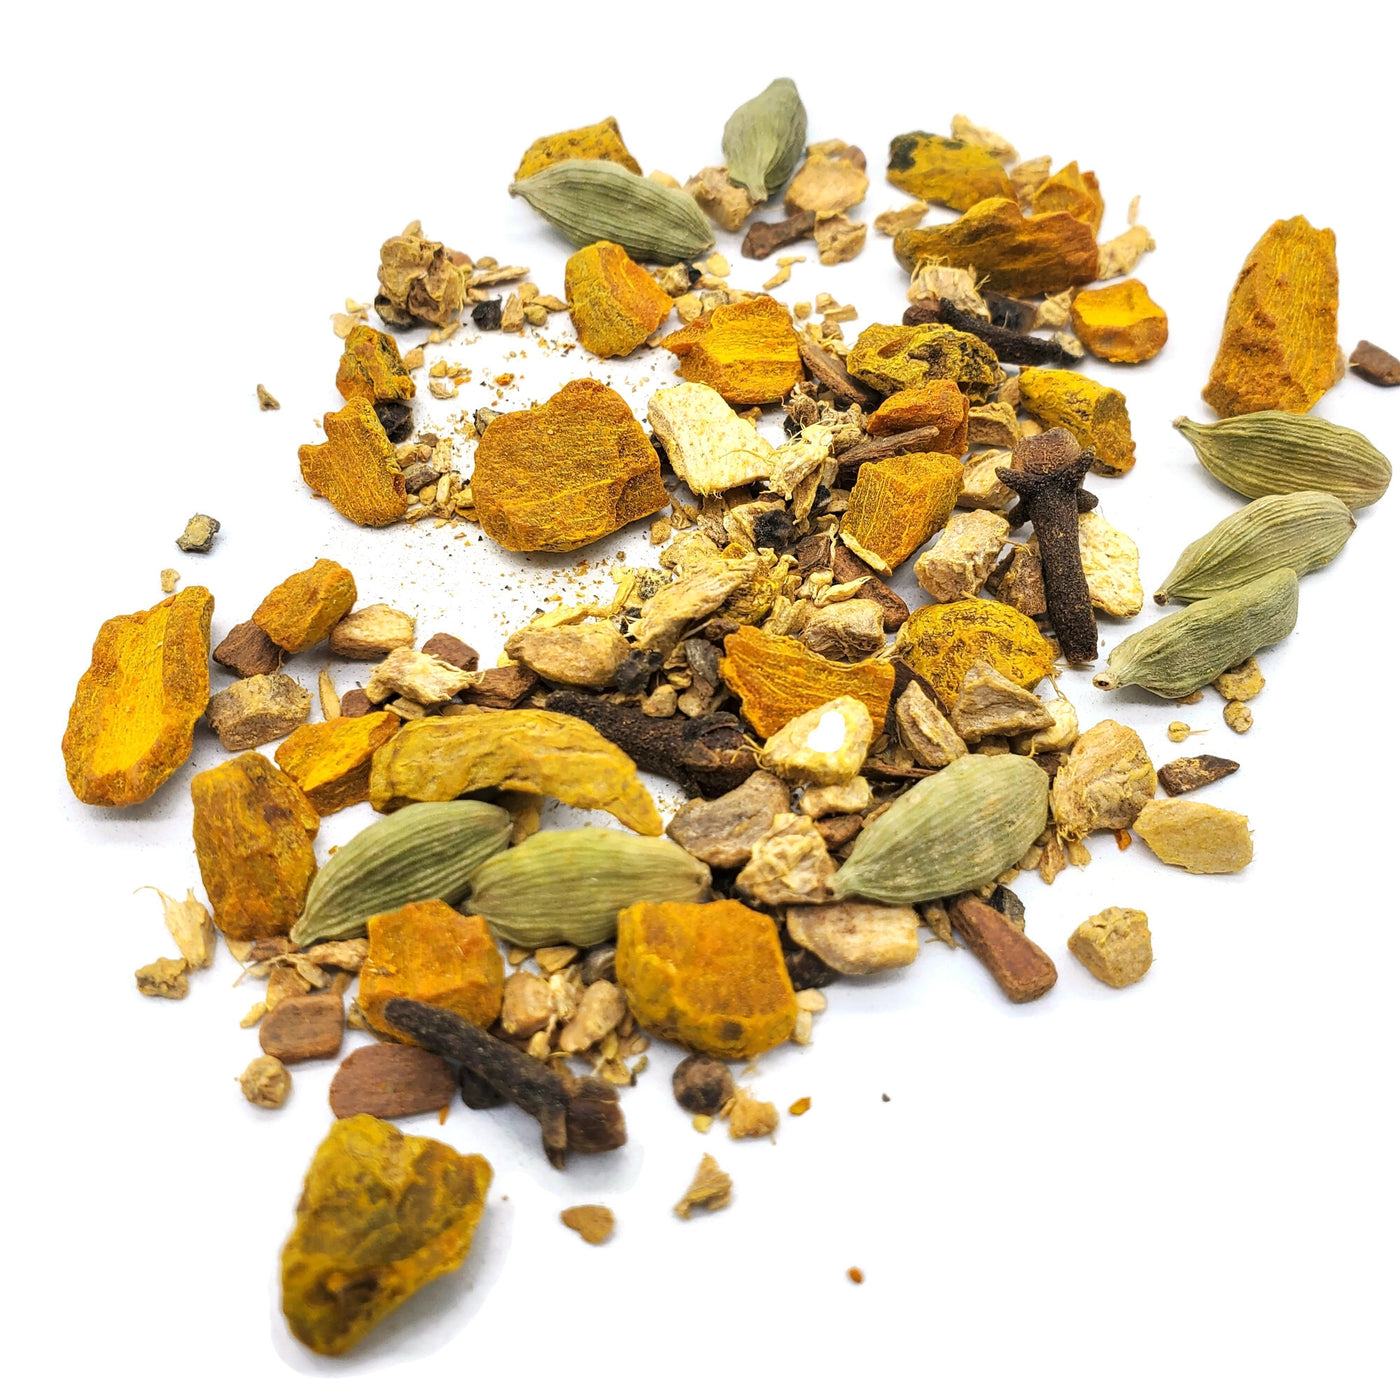 A blend of turmeric, cardemon pods, cacao and cinnamon chips